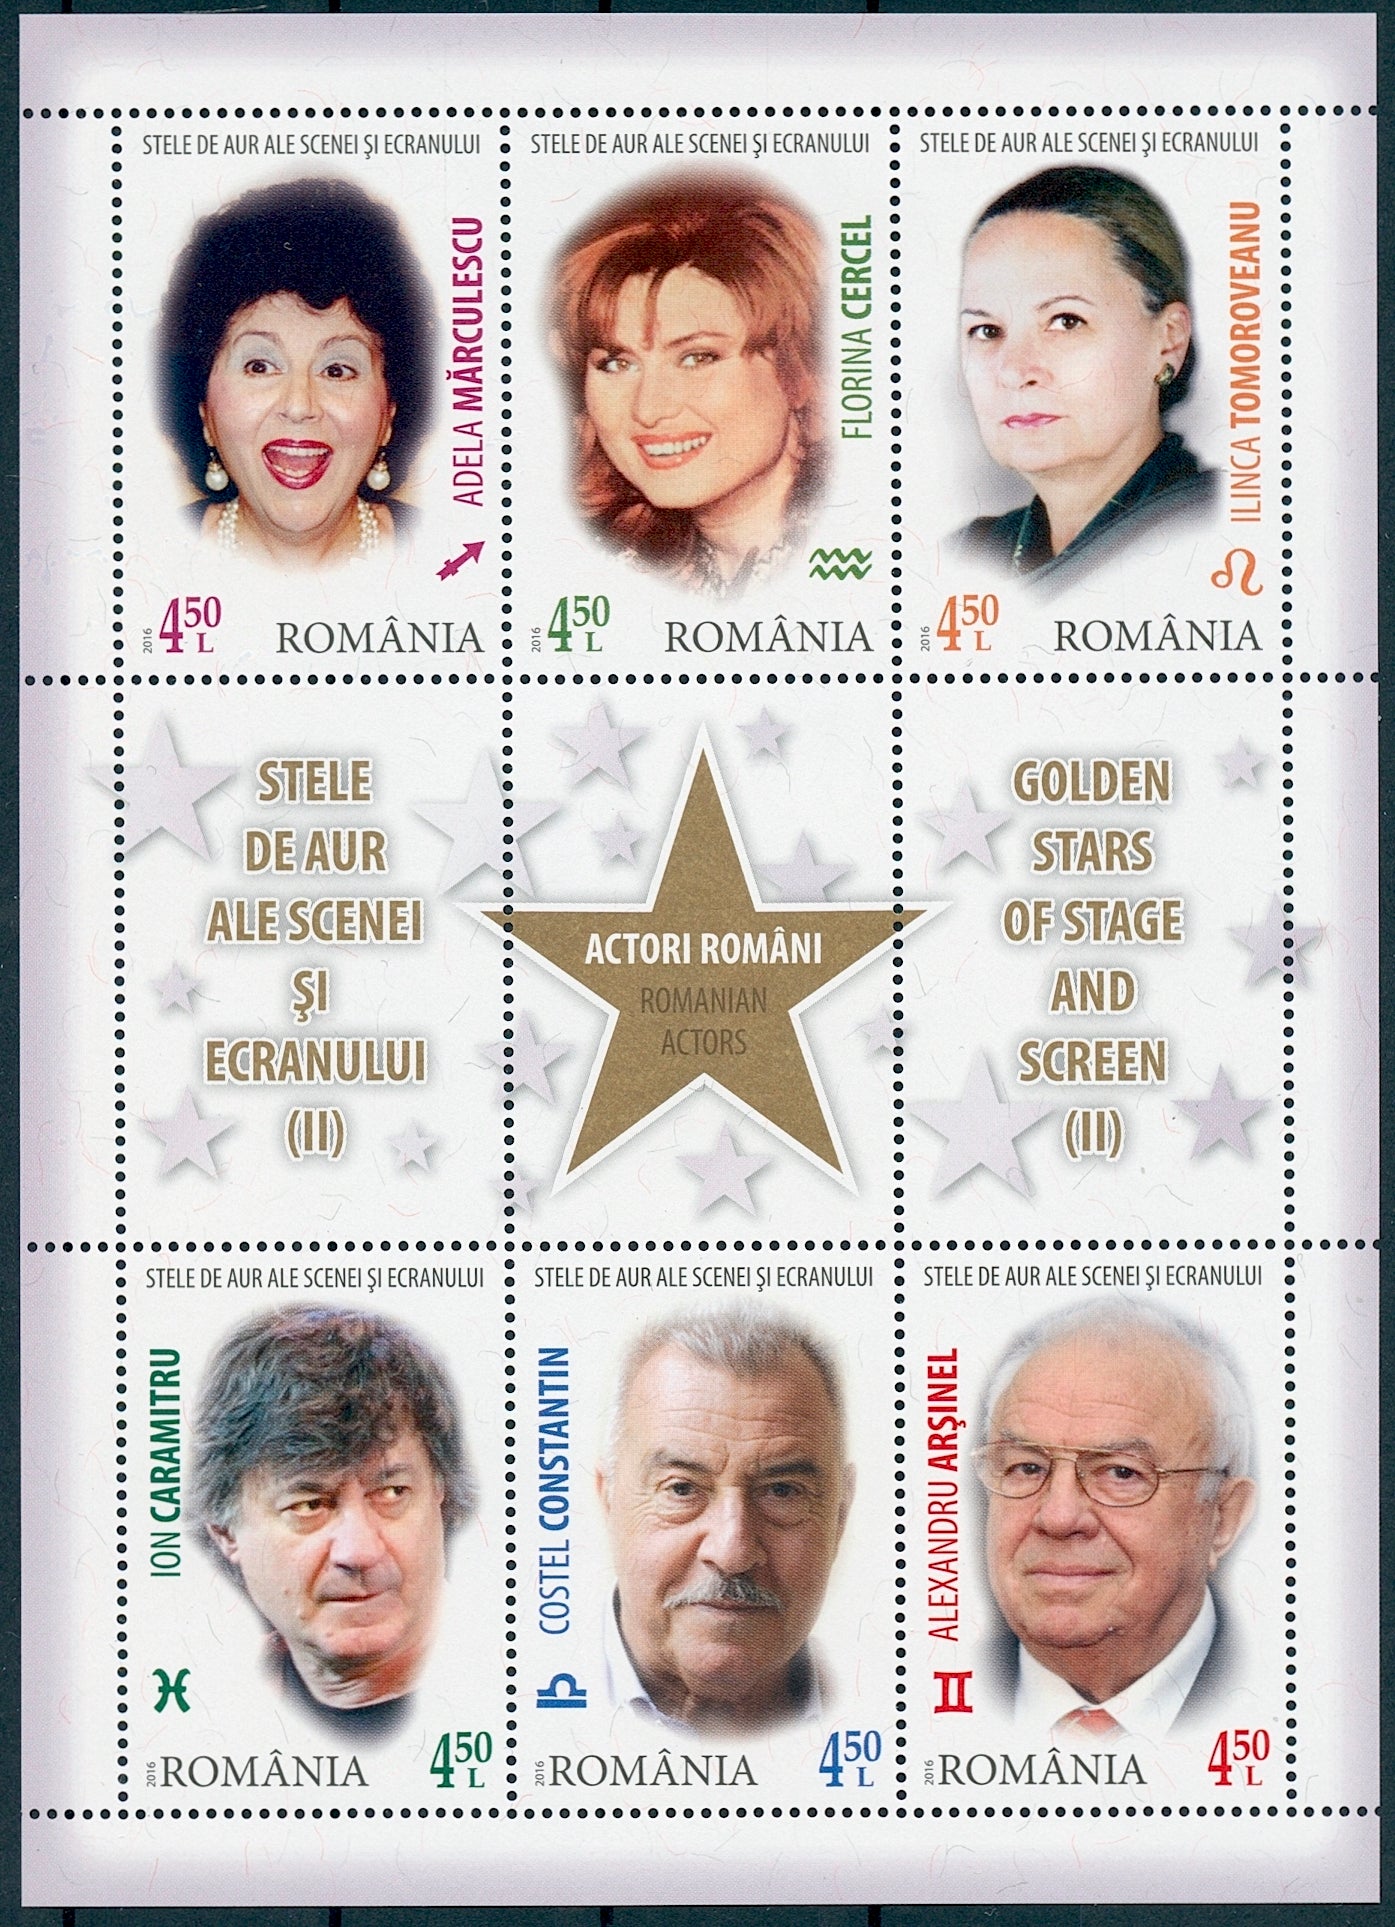 Romania 2016 MNH Golden Stars Stage & Screen Pt II 6v M/S Film Actors Stamps